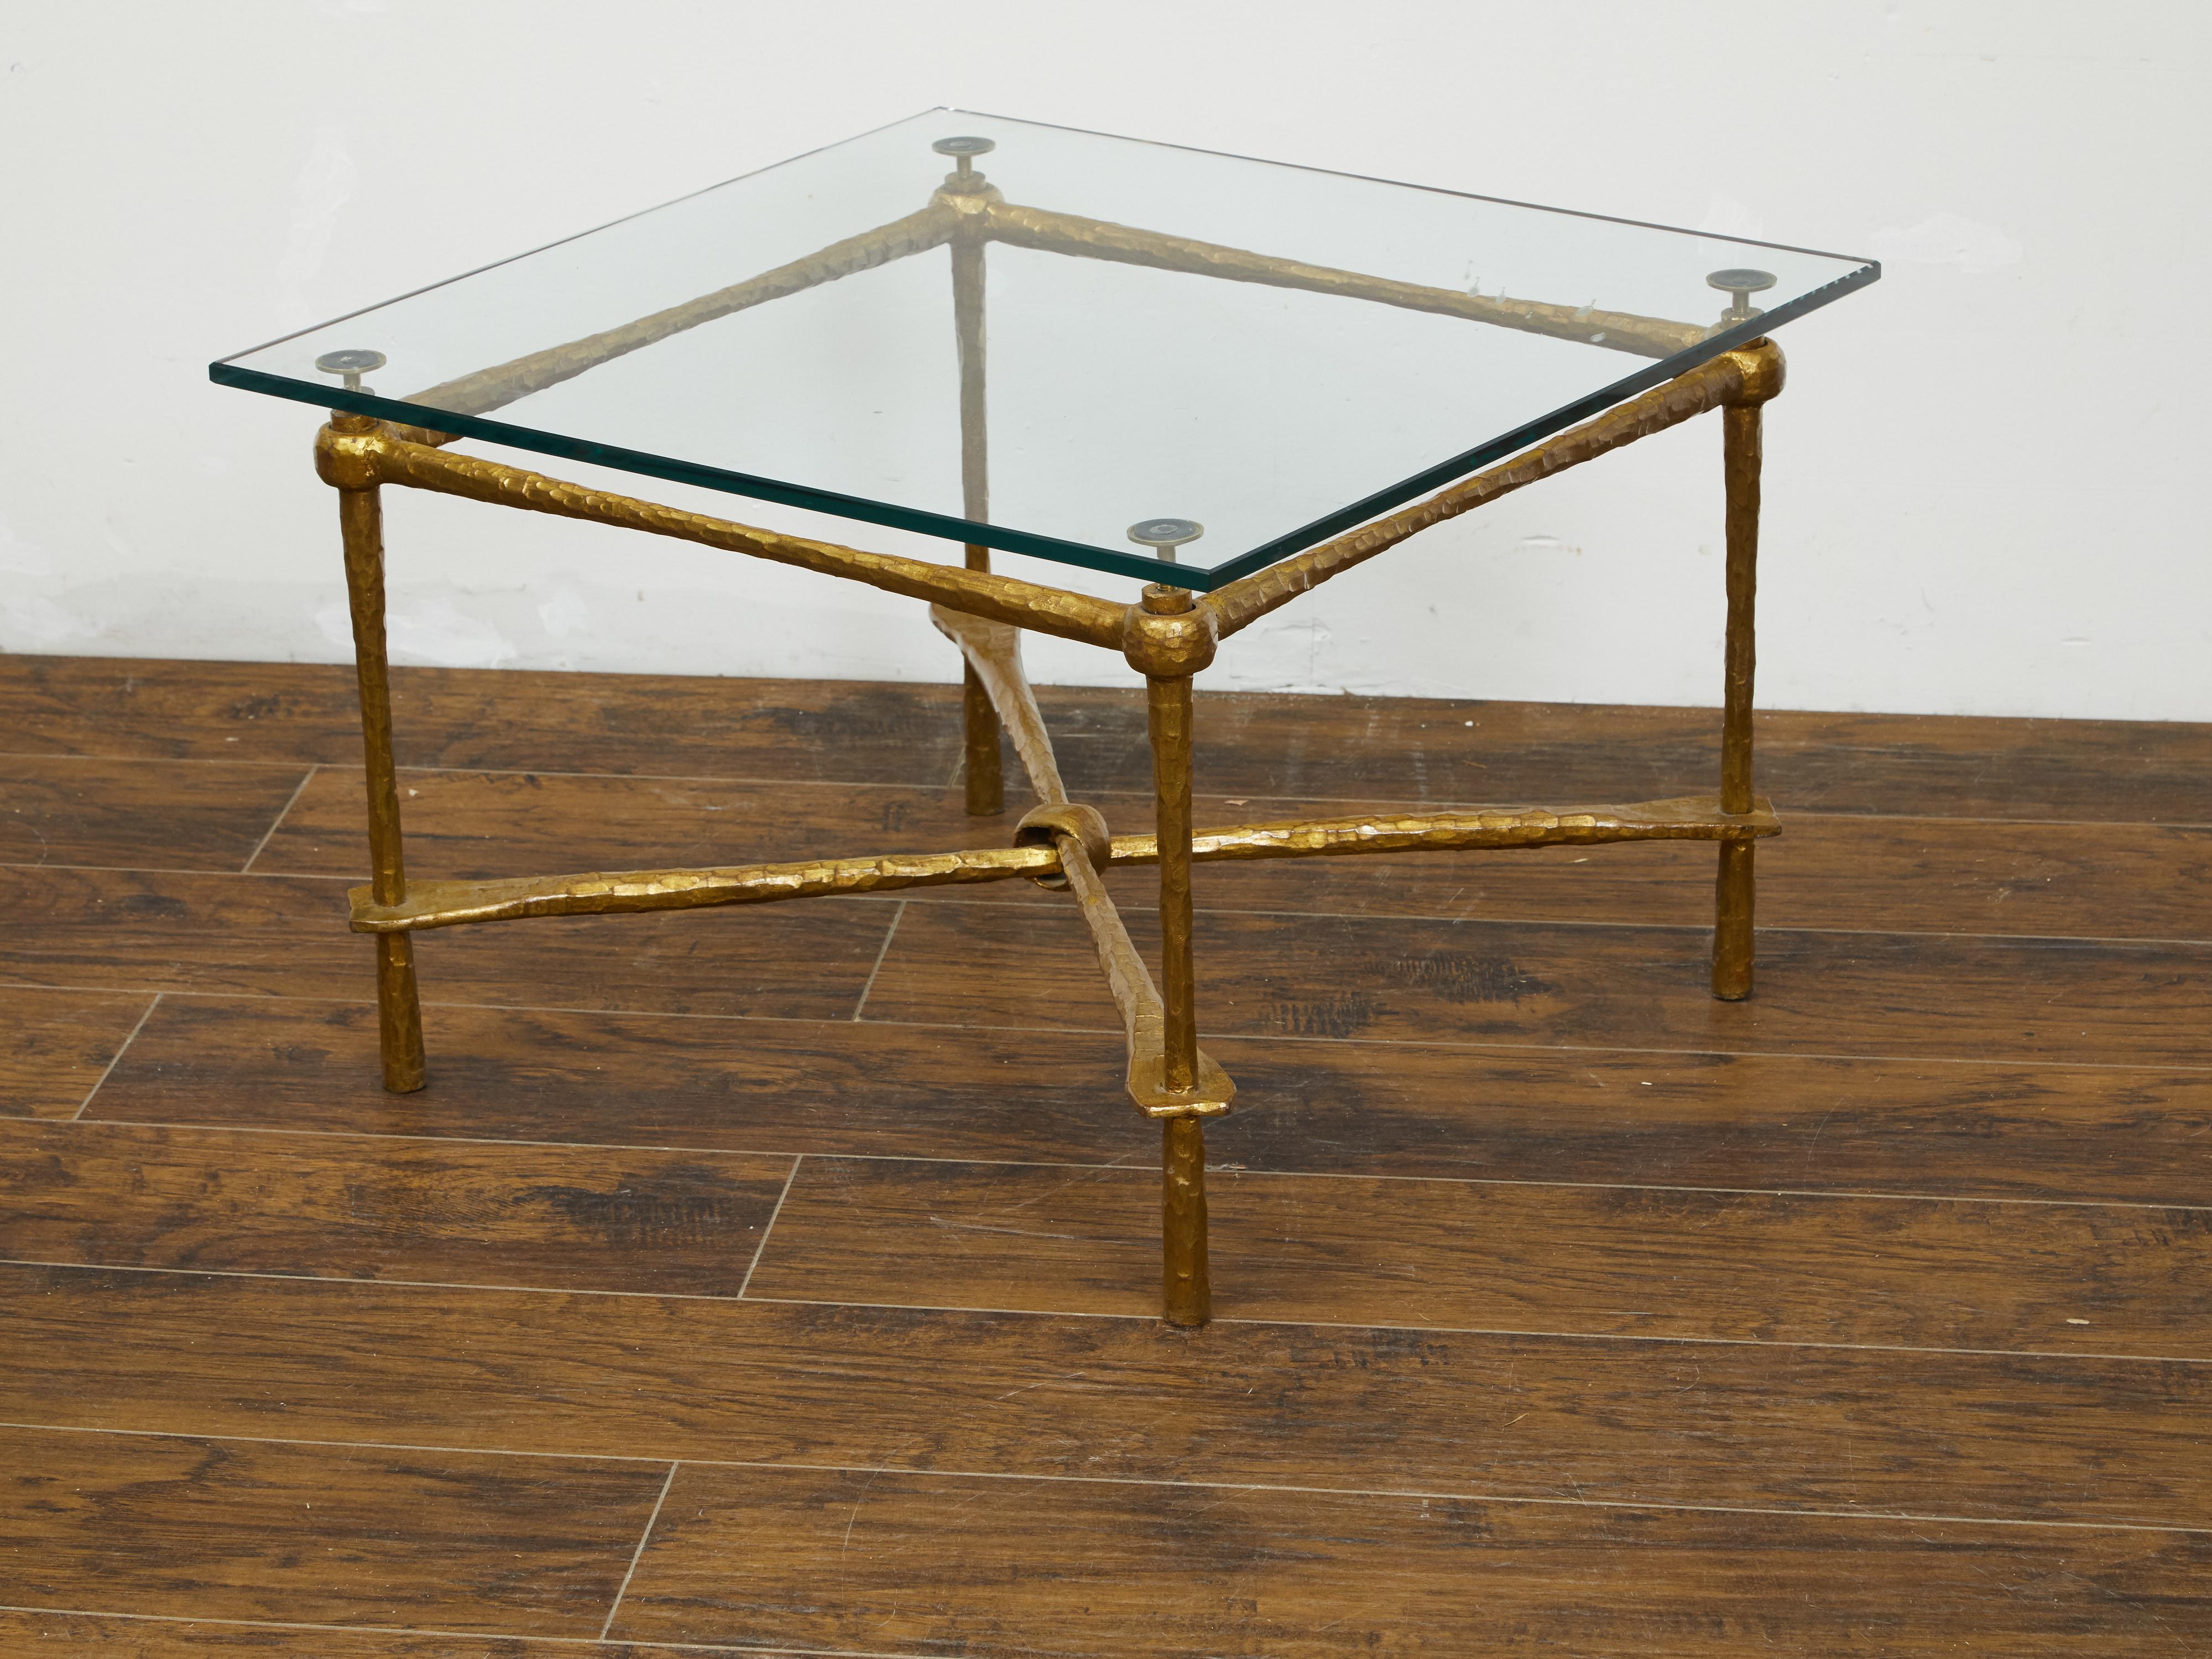 Italian Midcentury Gilt Metal Coffee Table with Glass Top and Hammered Accents For Sale 2